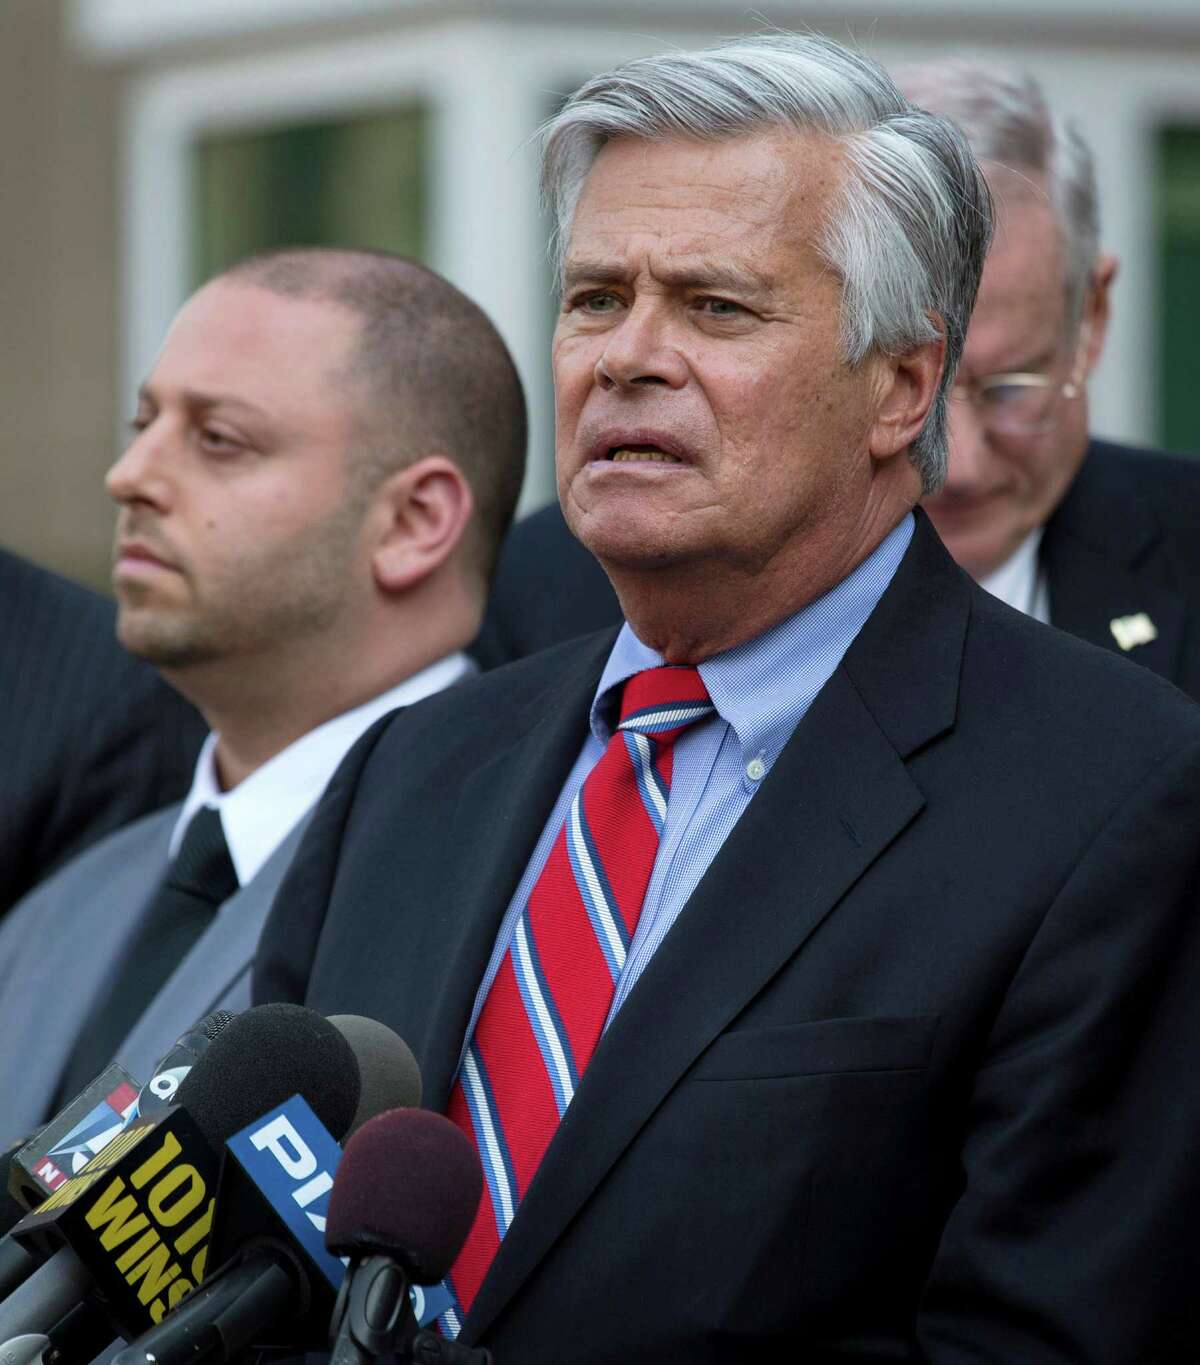 FILE- In this May 4, 2015 file photo, New York Senate Majority Leader Dean Skelos, right, speaks alongside his son Adam after their arraignment on federal charges including extortion and soliciting bribes. Dean Skelos, who was born, raised and still lives in Rockville Centre, said that despite growing pressure for him to resign, he is getting strong support from his Long Island neighbors. (AP Photo/Craig Ruttle, File) ORG XMIT: NYR401